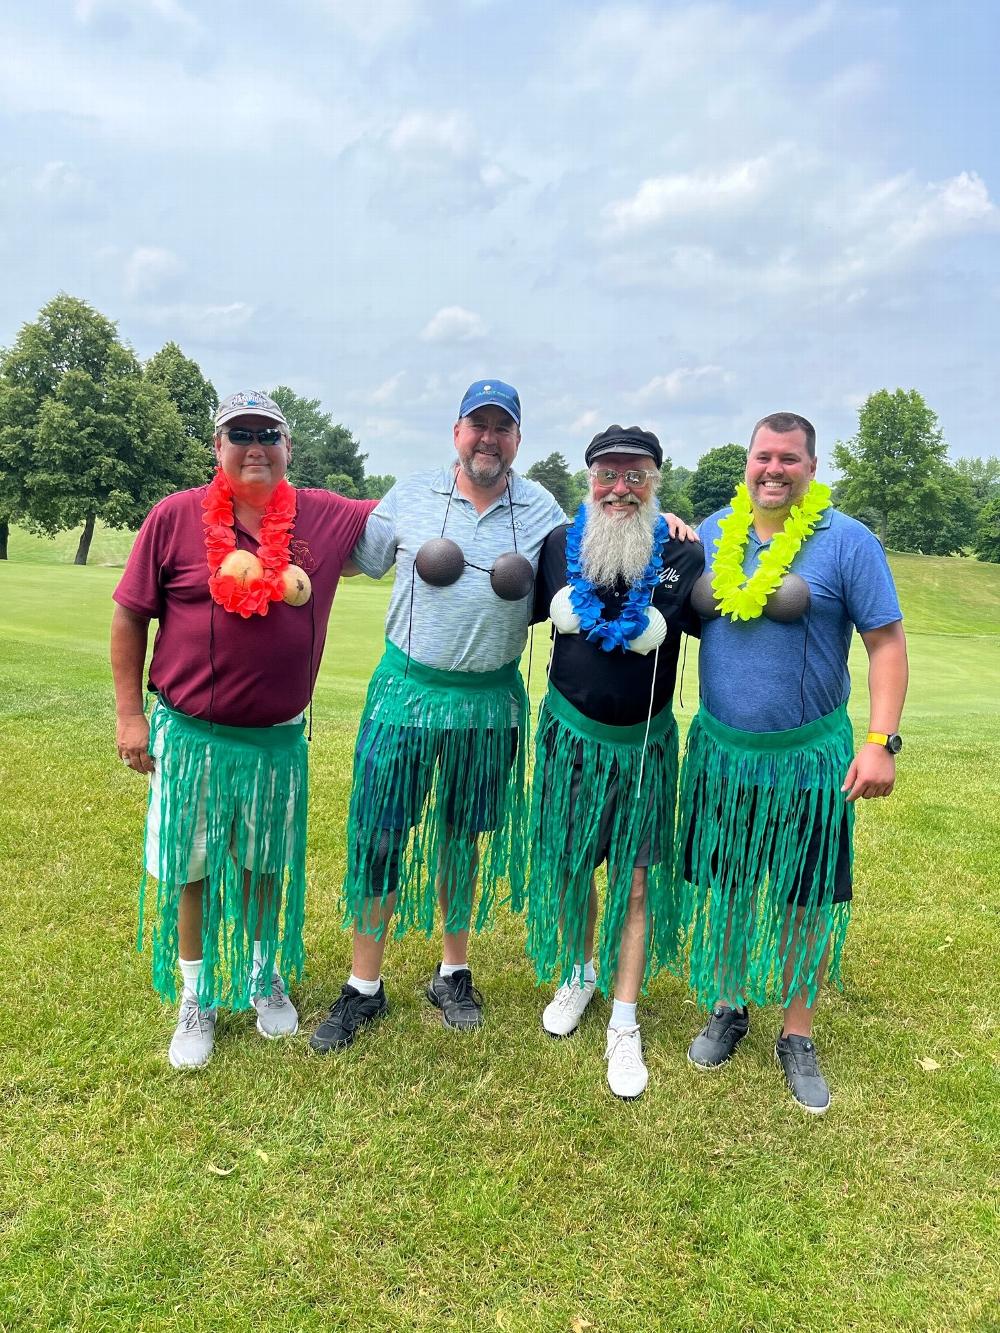 Team "Coconuts" Elks #1248 @ Gold Key Golf Outing 